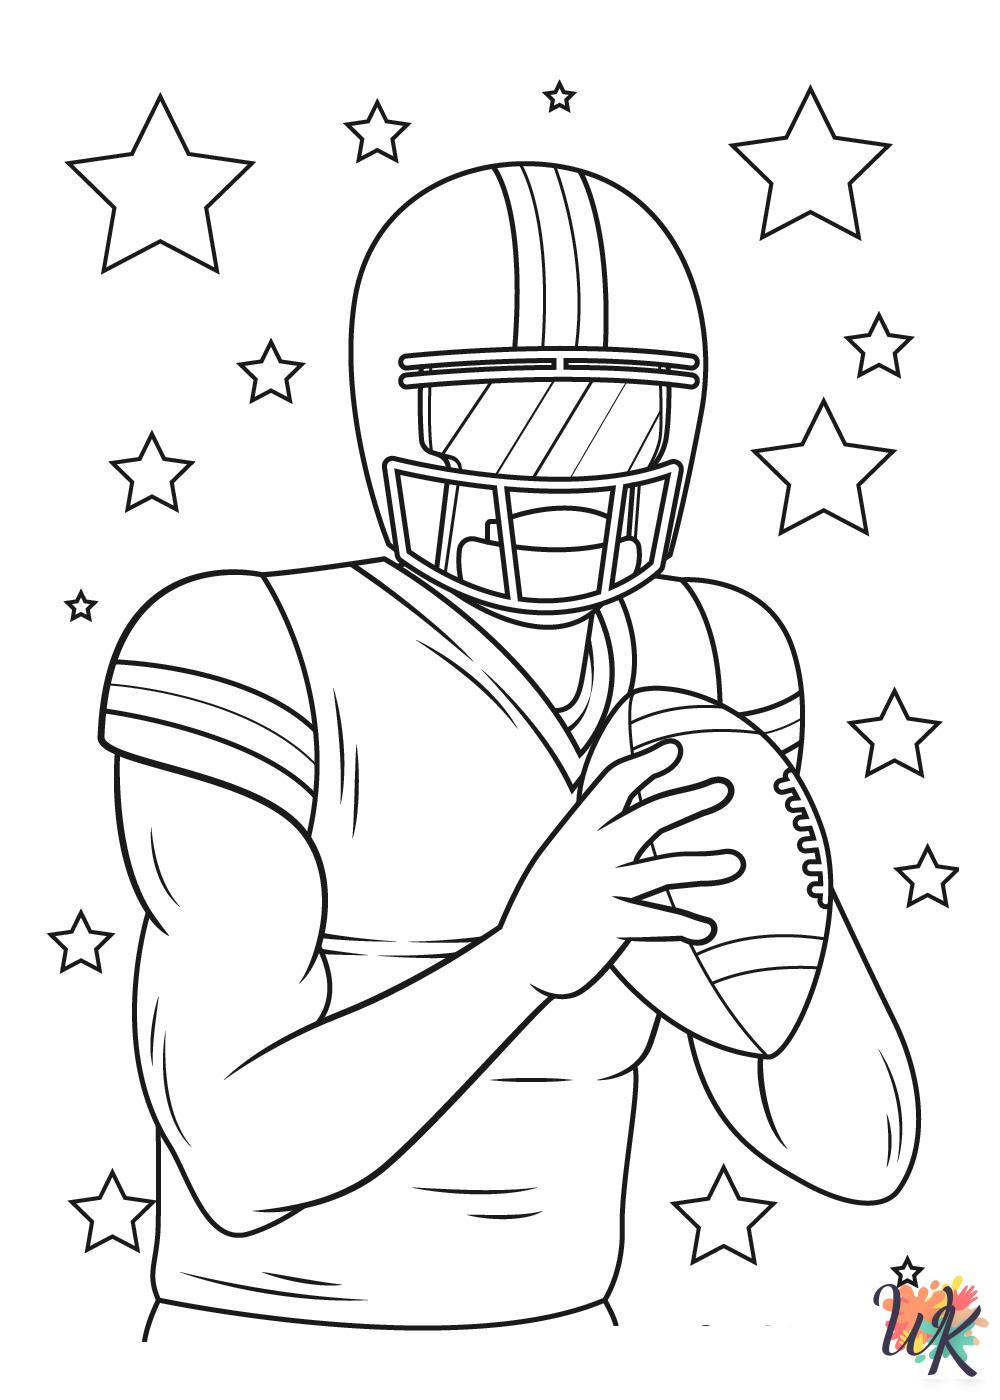 NFL Coloring Pages 9